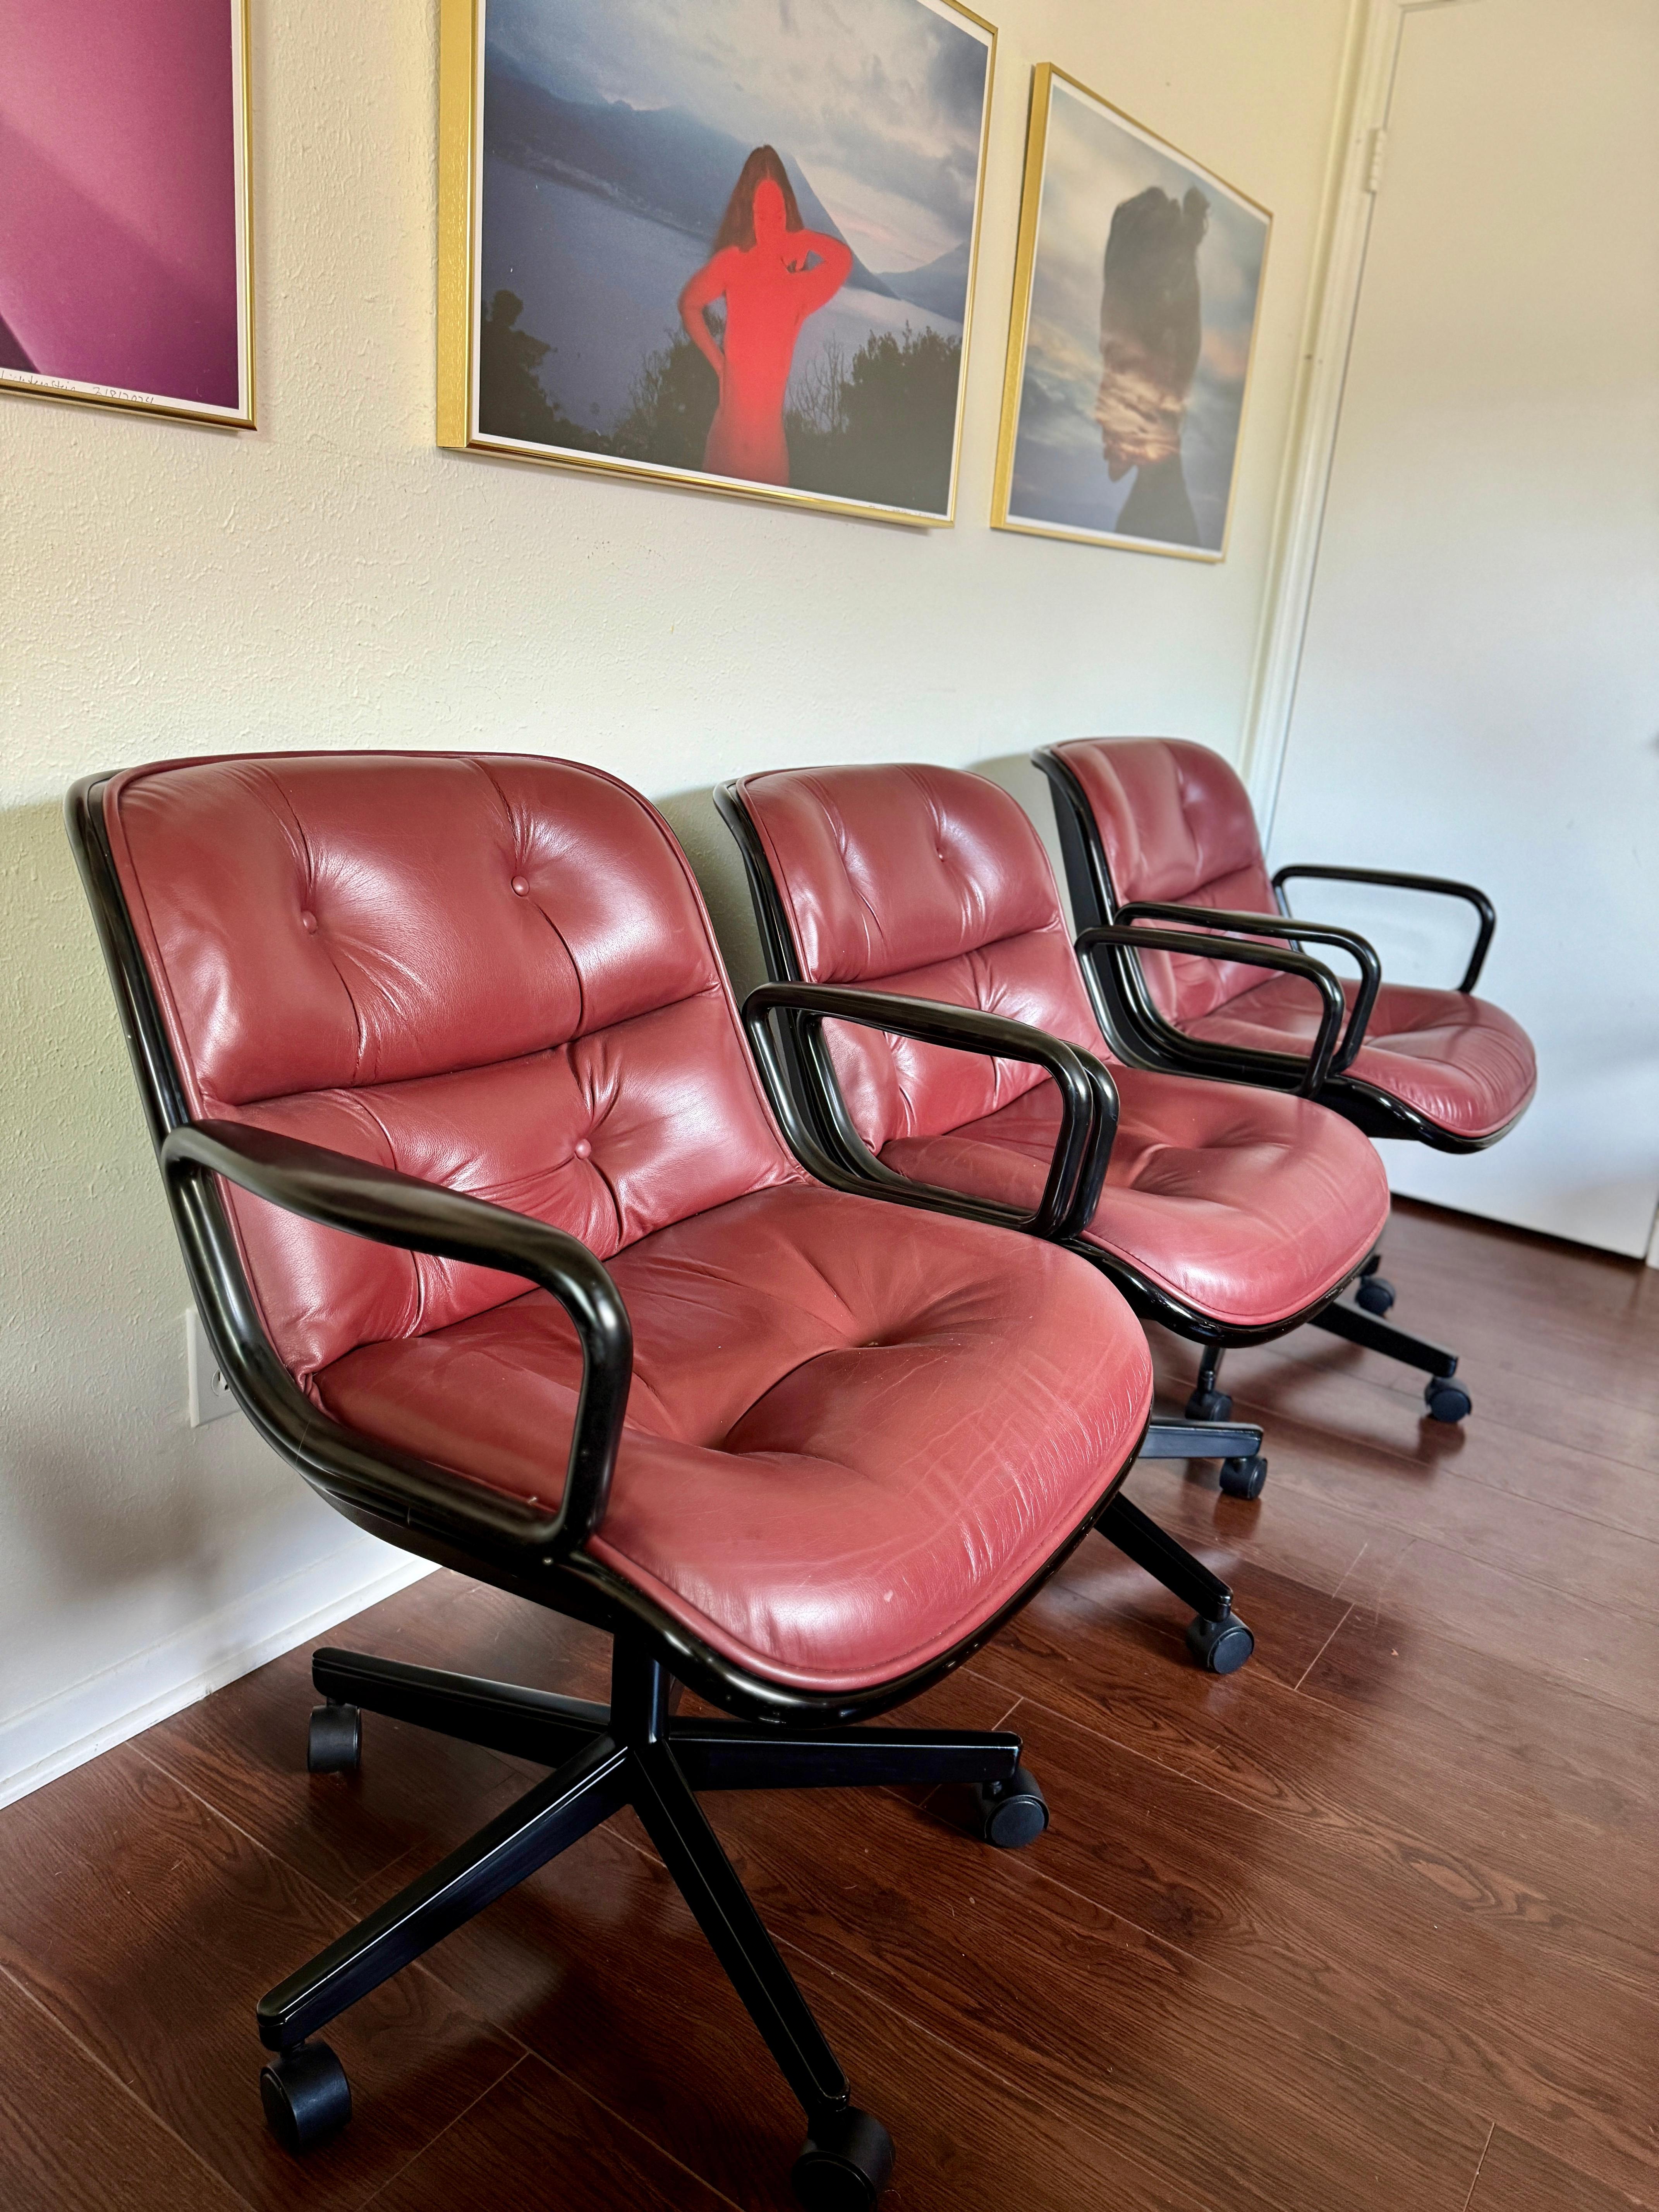 Buttery set of 3 executive armchairs designed by Charles Pollock for Knoll in 1956, in a rustic red leather upholstery with black arms on a 5 star swivel base with casters, tags still attached. Chair height is adjustable. Overall in good original